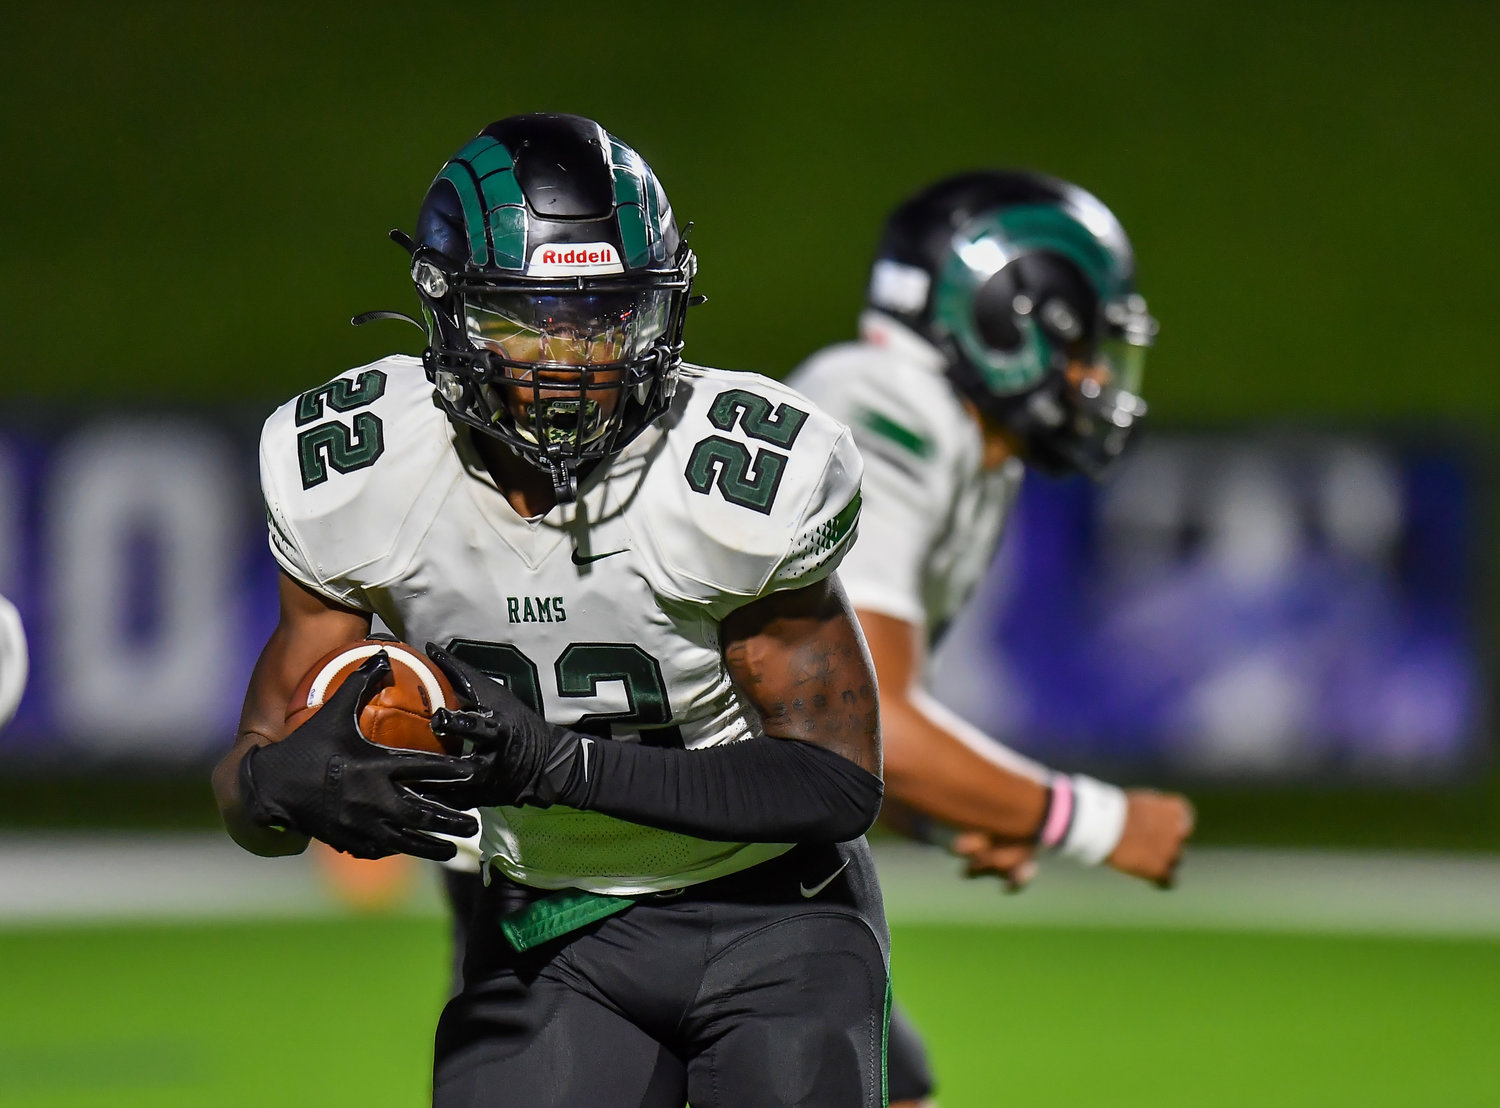 Katy, Tx. Oct 15, 2021: Mayde Creeks Marvin Bodden #22 carries the ball during a conference game between Mayde Creek and Katy Taylor at Rhodes Stadium. (Photo by Mark Goodman / Katy Times)